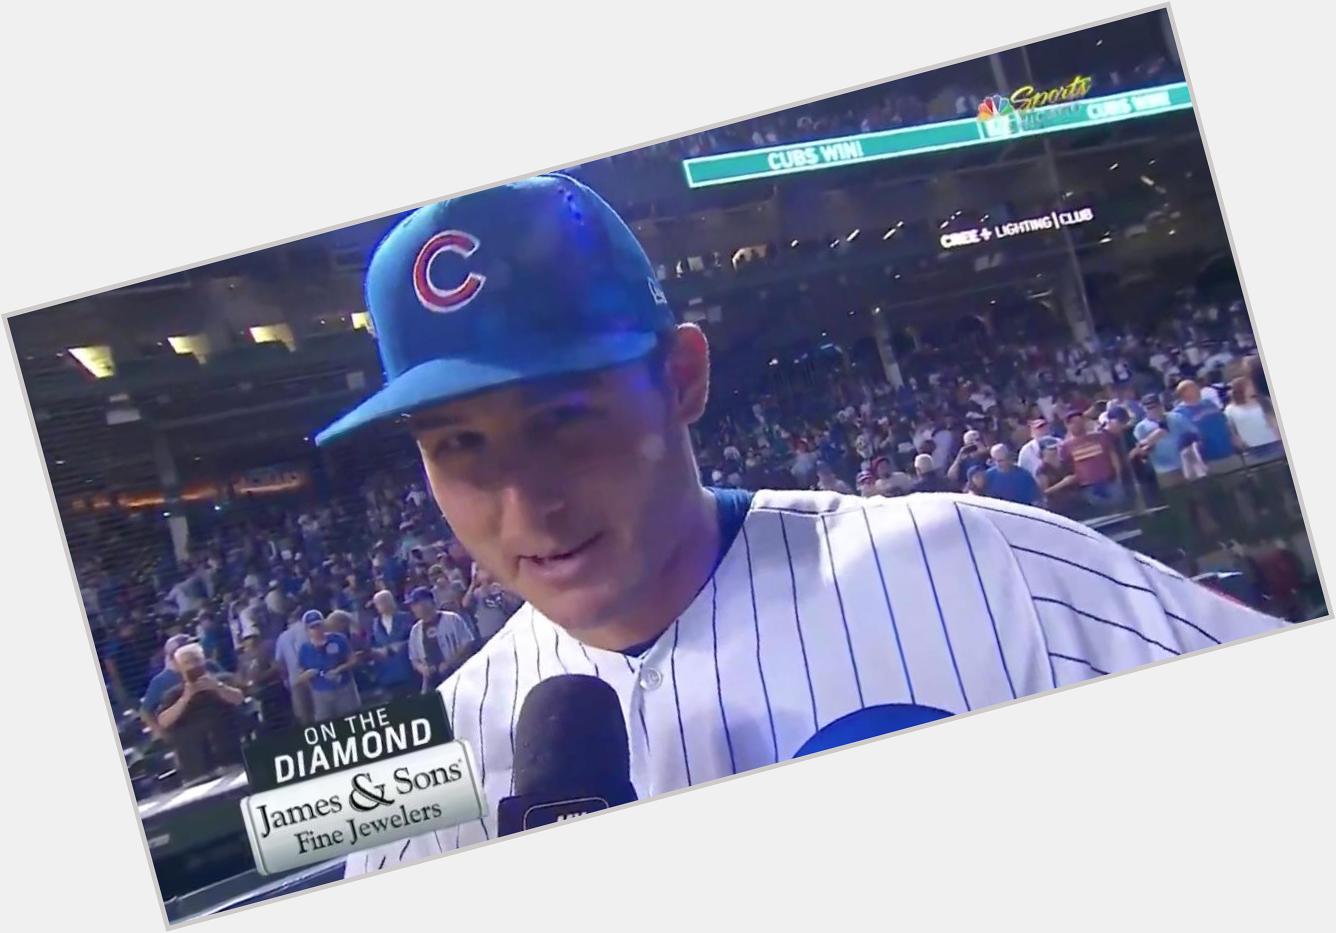 ICYMI: WATCH: Anthony Rizzo wishes his mom happy birthday in postgame interview:  